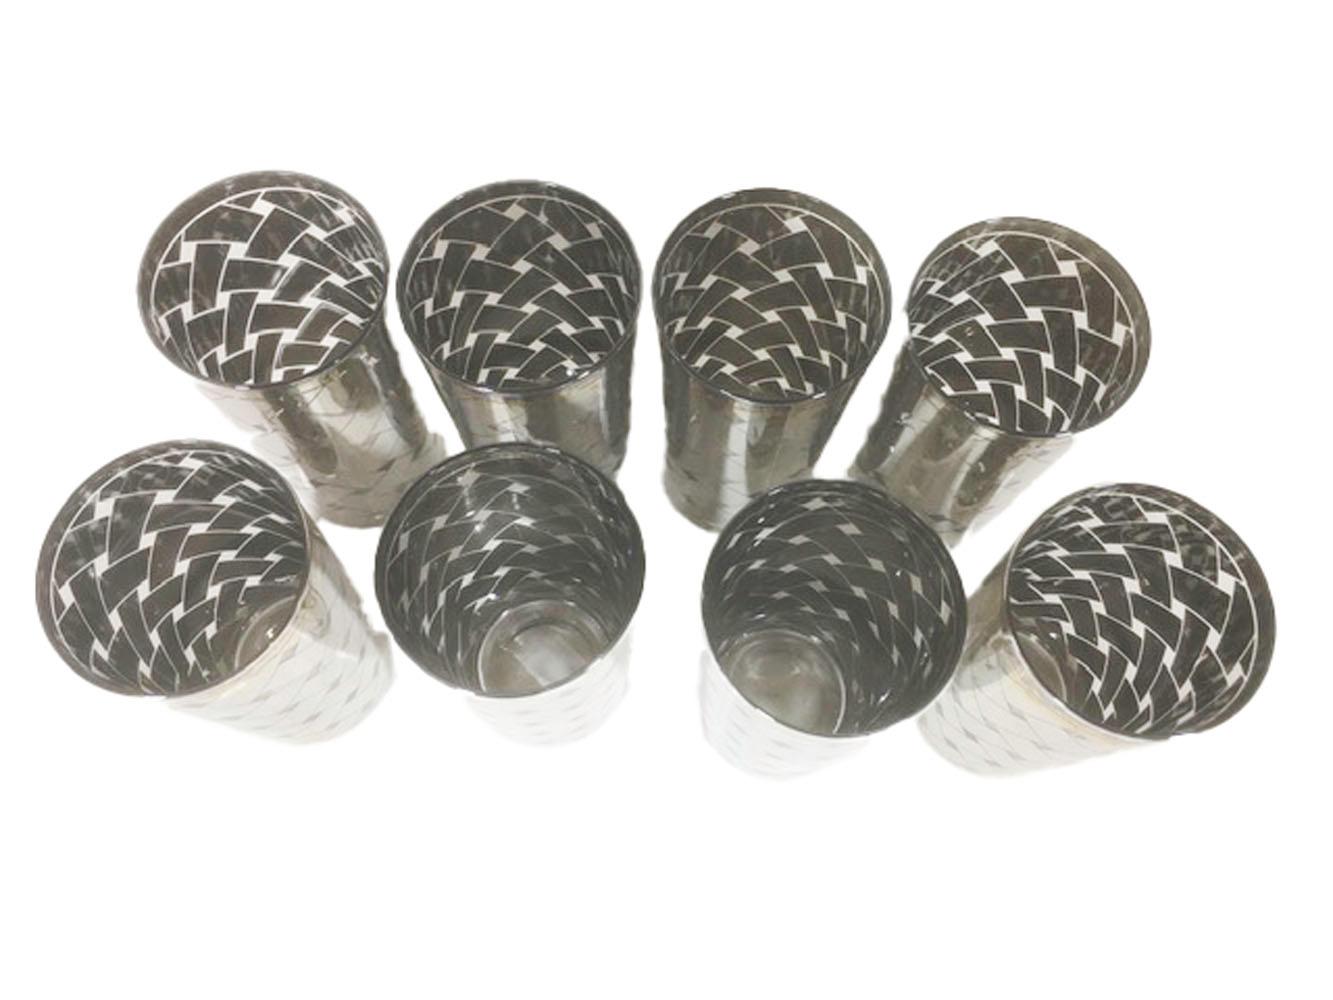 Mid-Century Modern highball glasses with an allover basket weave pattern in silver. The design is made up of wide bars of silver with openings in between giving the illusion of an open weave.